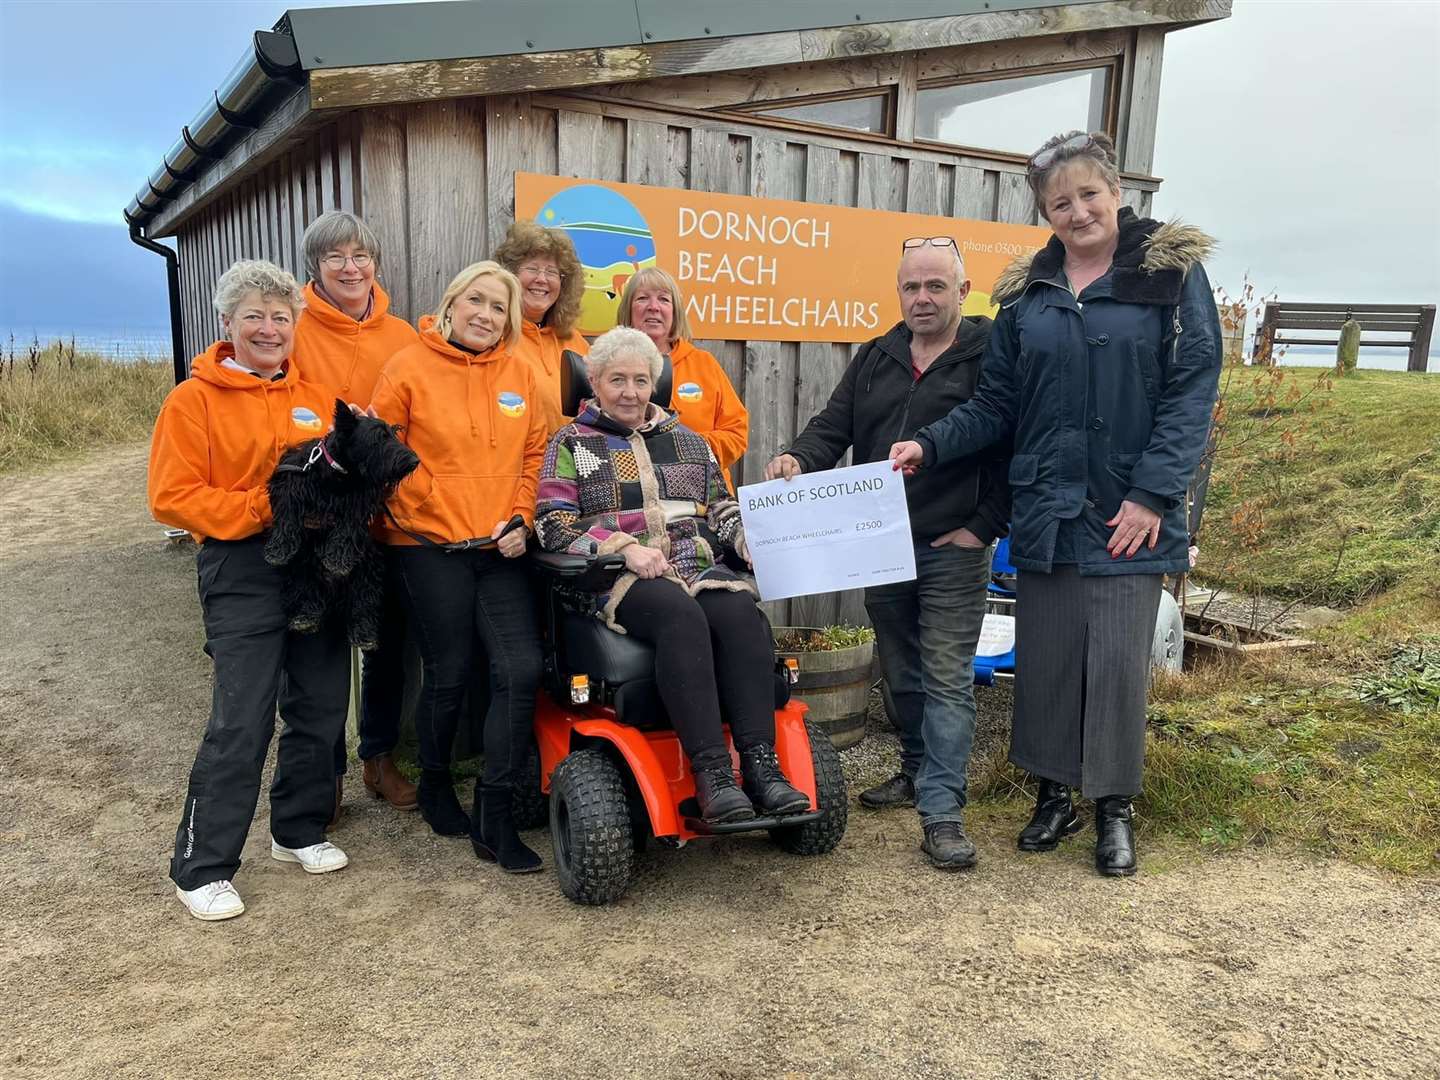 Catherine Macangus (right), Billy Renwich and Marlene Mackay hand over a cheque over to the team who run Dornoch Beach Wheelchairs.